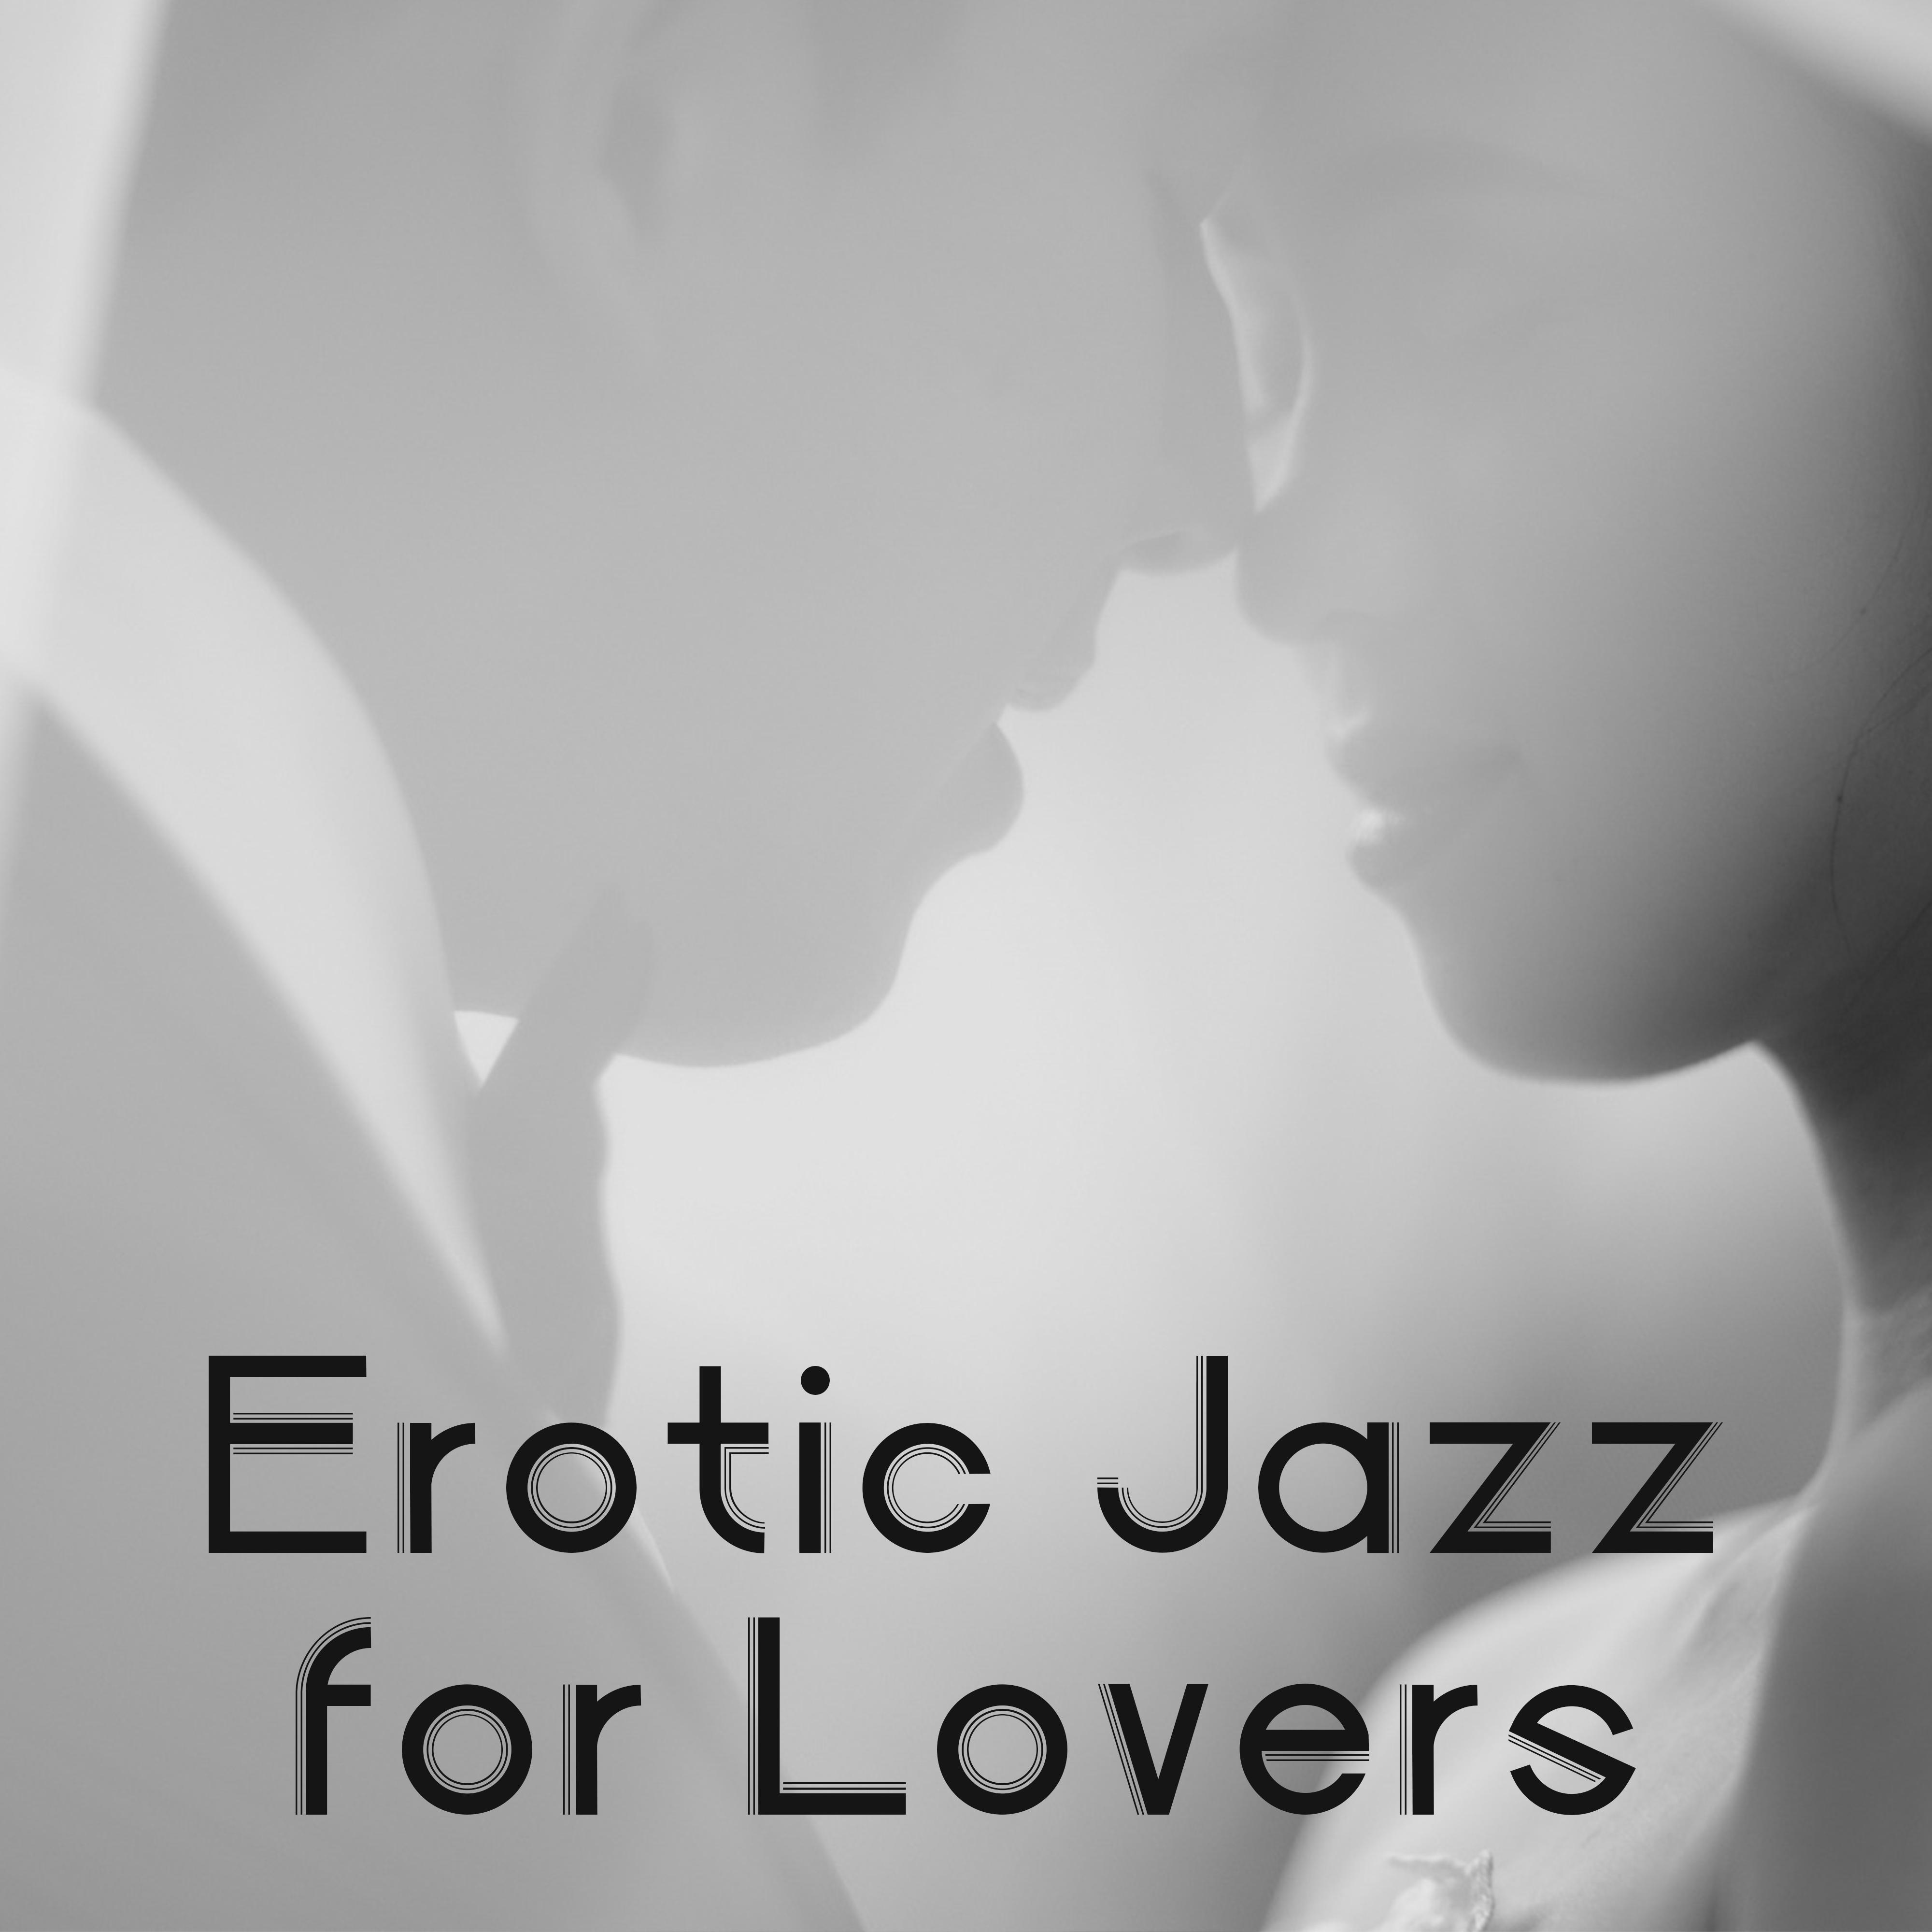 Erotic Jazz for Lovers  Instrumental Jazz Music, Romantic Evening, Sensual Sounds for Lovers,  Note